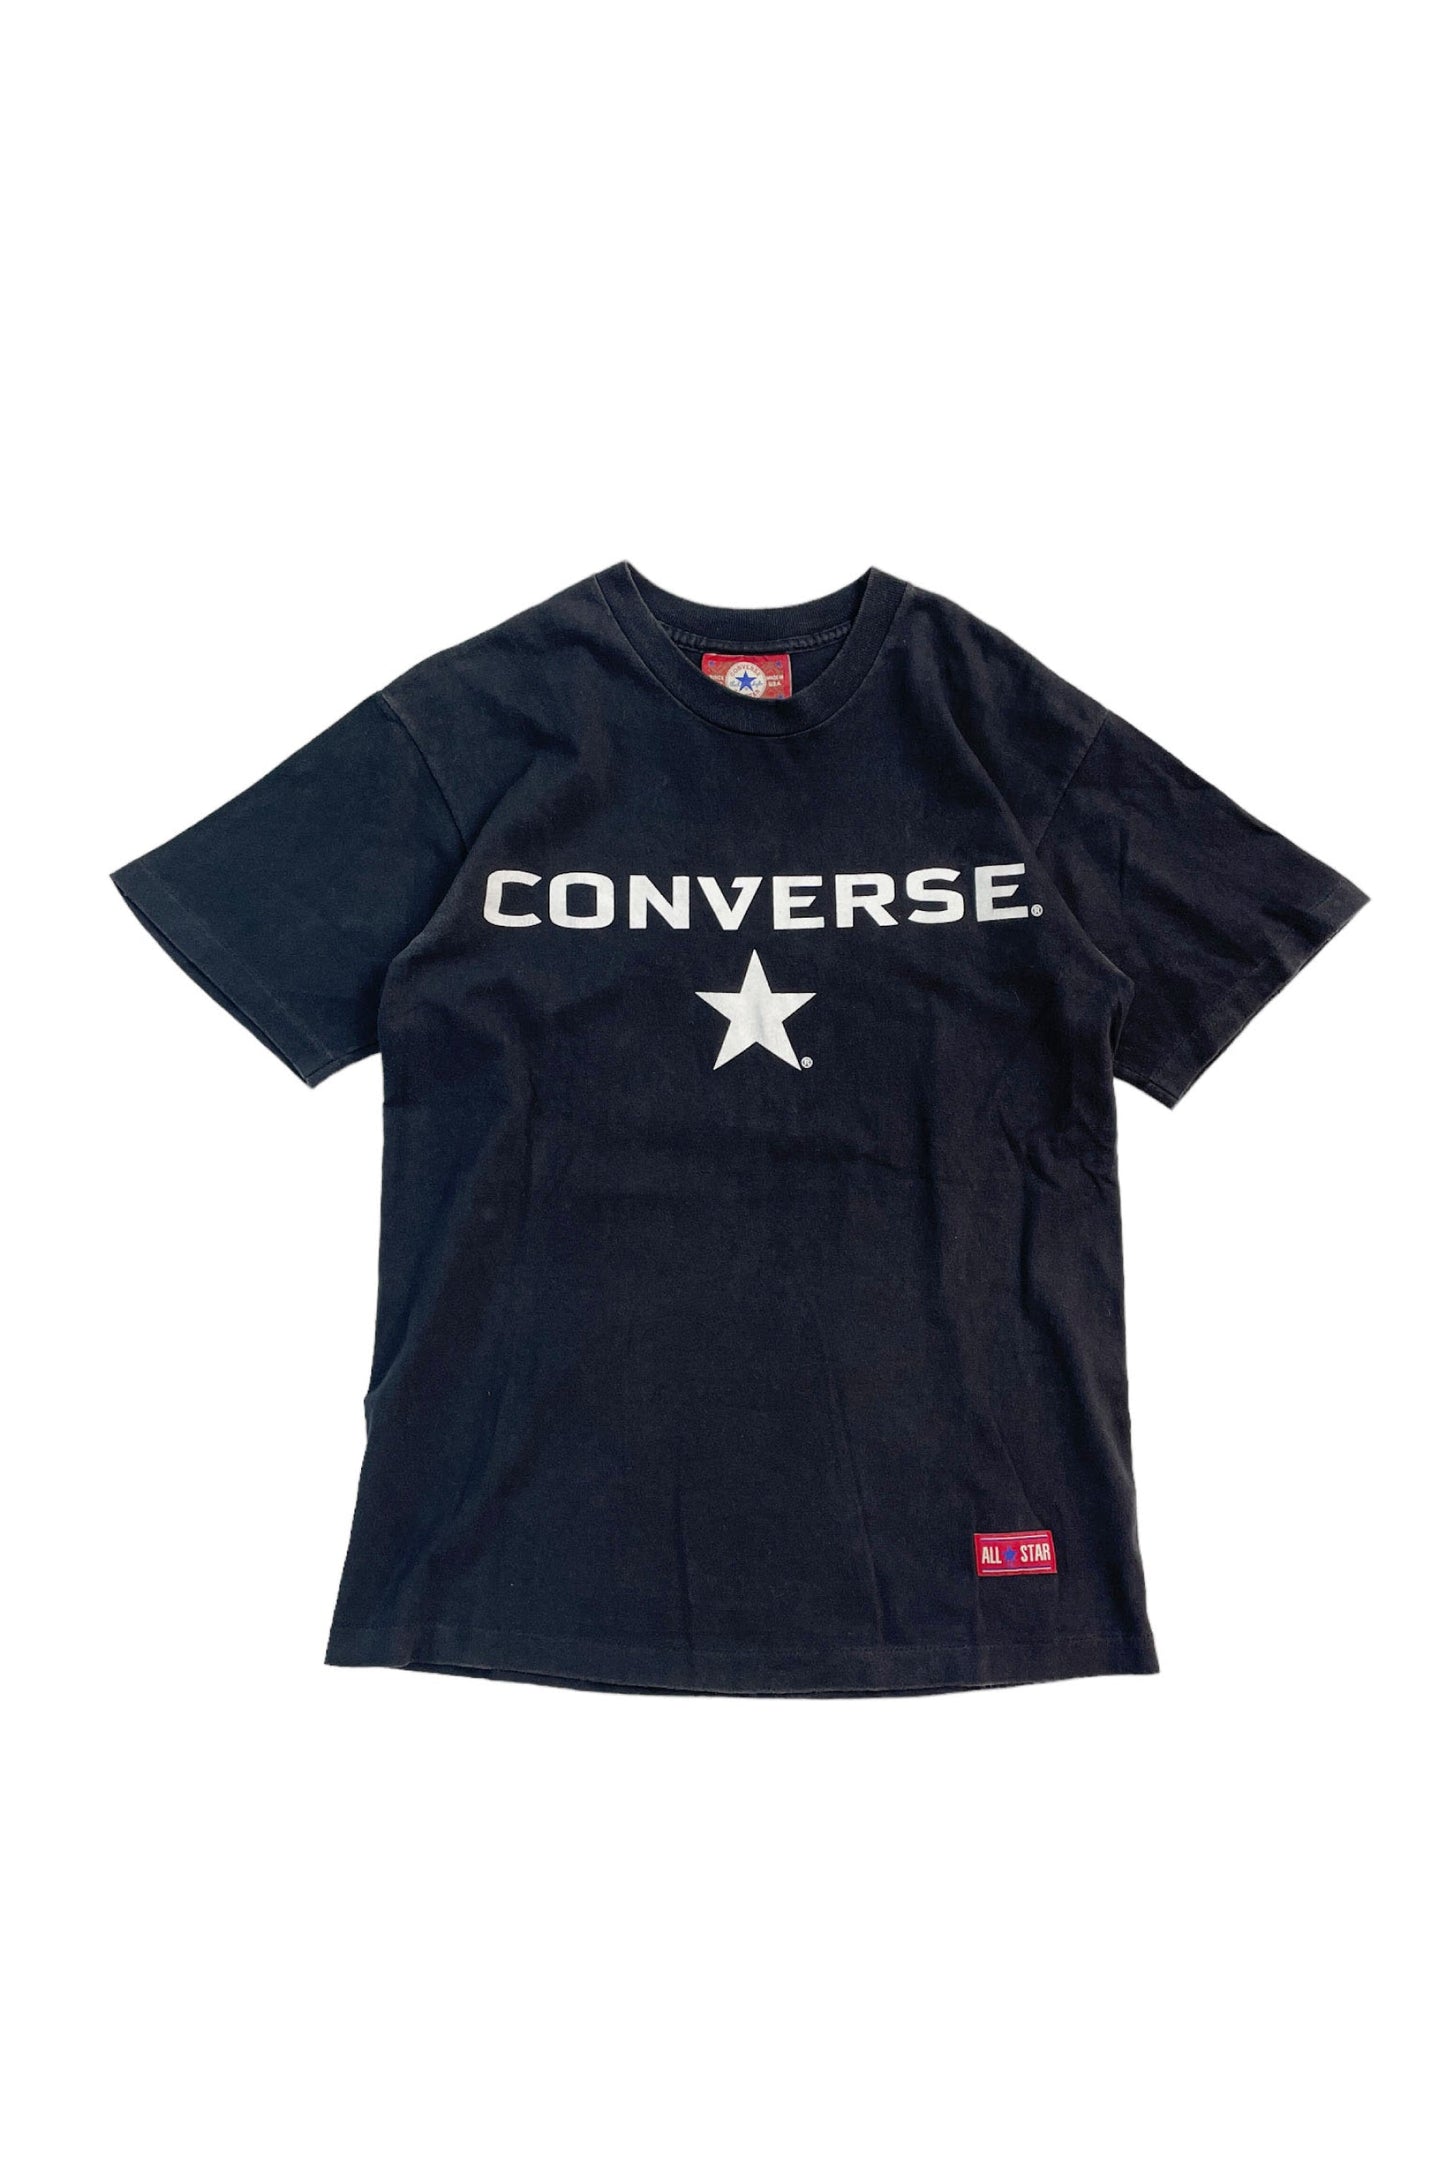 90's Made in USA CONVERSE ALL STAR T-shirt – ReSCOUNT STORE